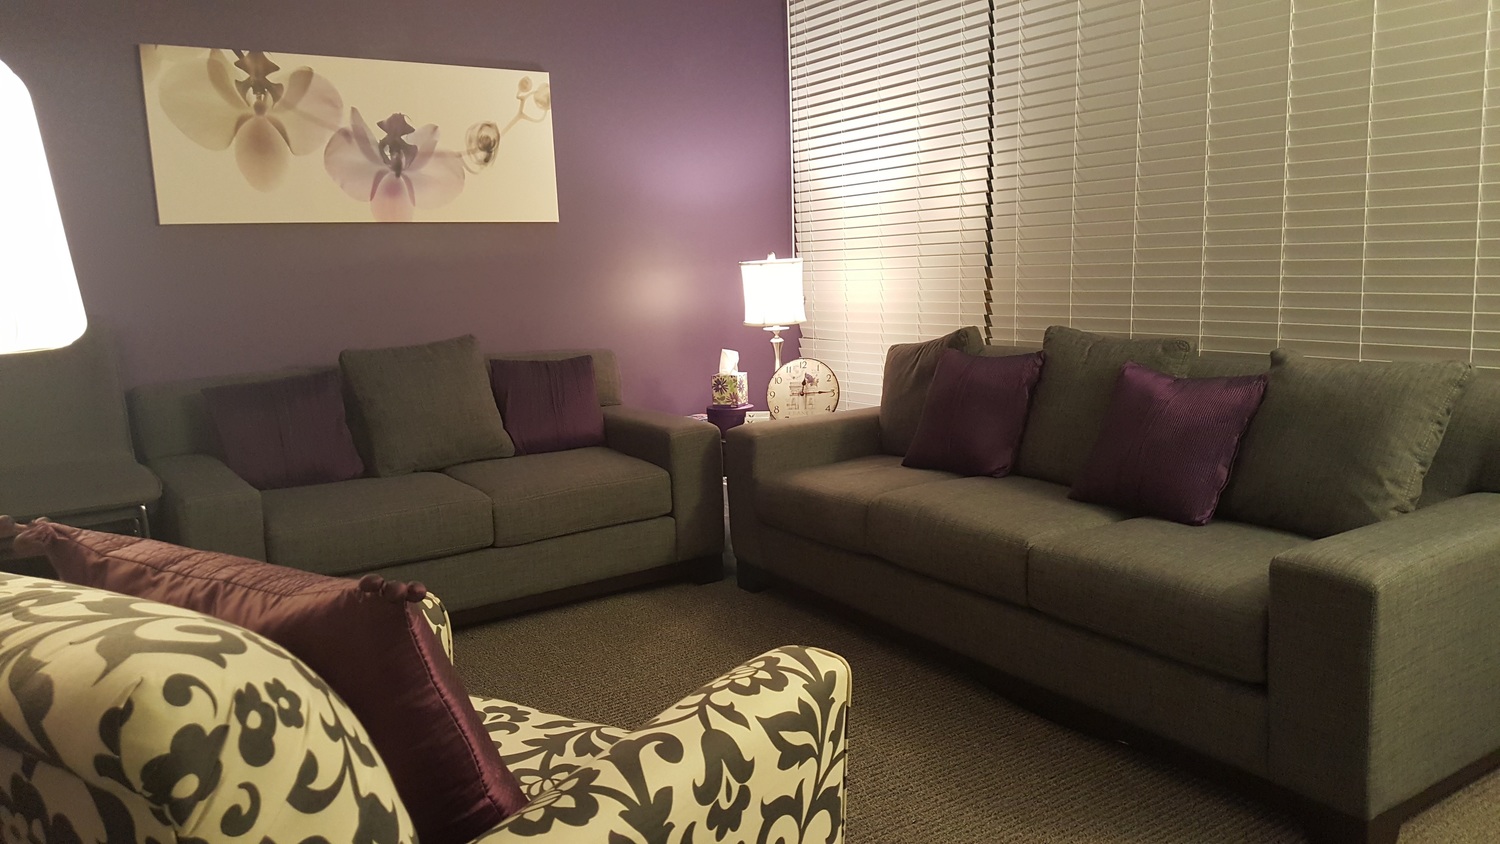 Gallery Photo of Hope Therapy Center - come find hope and healing